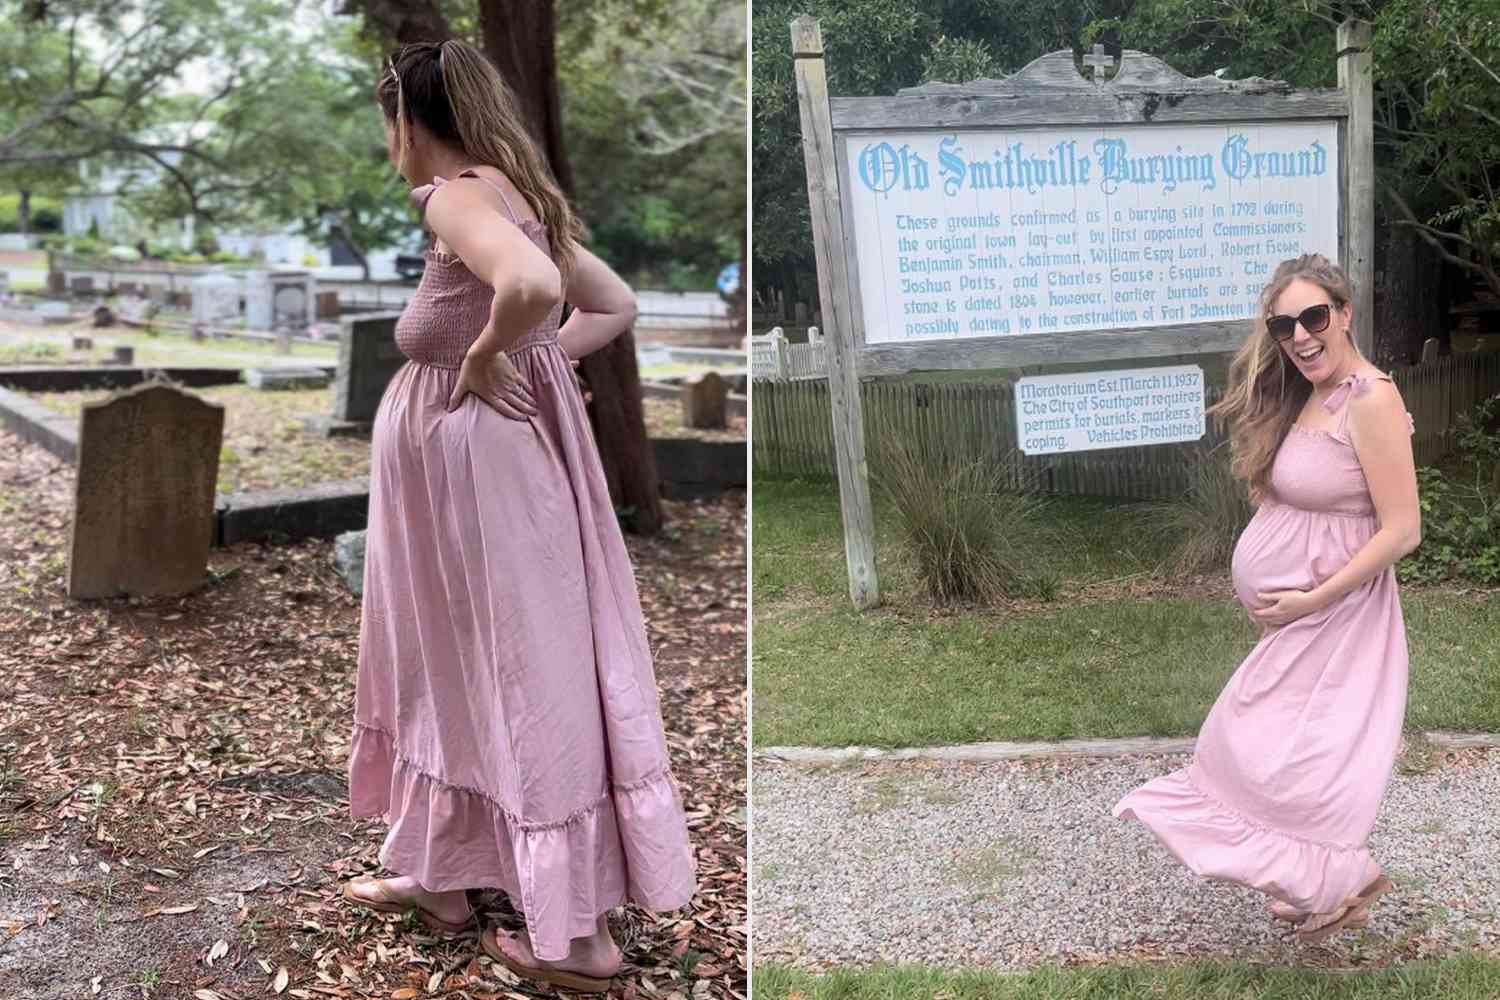 Pregnant Mom Defends Search for Baby's Name in Cemetery After Video Goes Viral: Not a 'Place of Evil' (Exclusive)